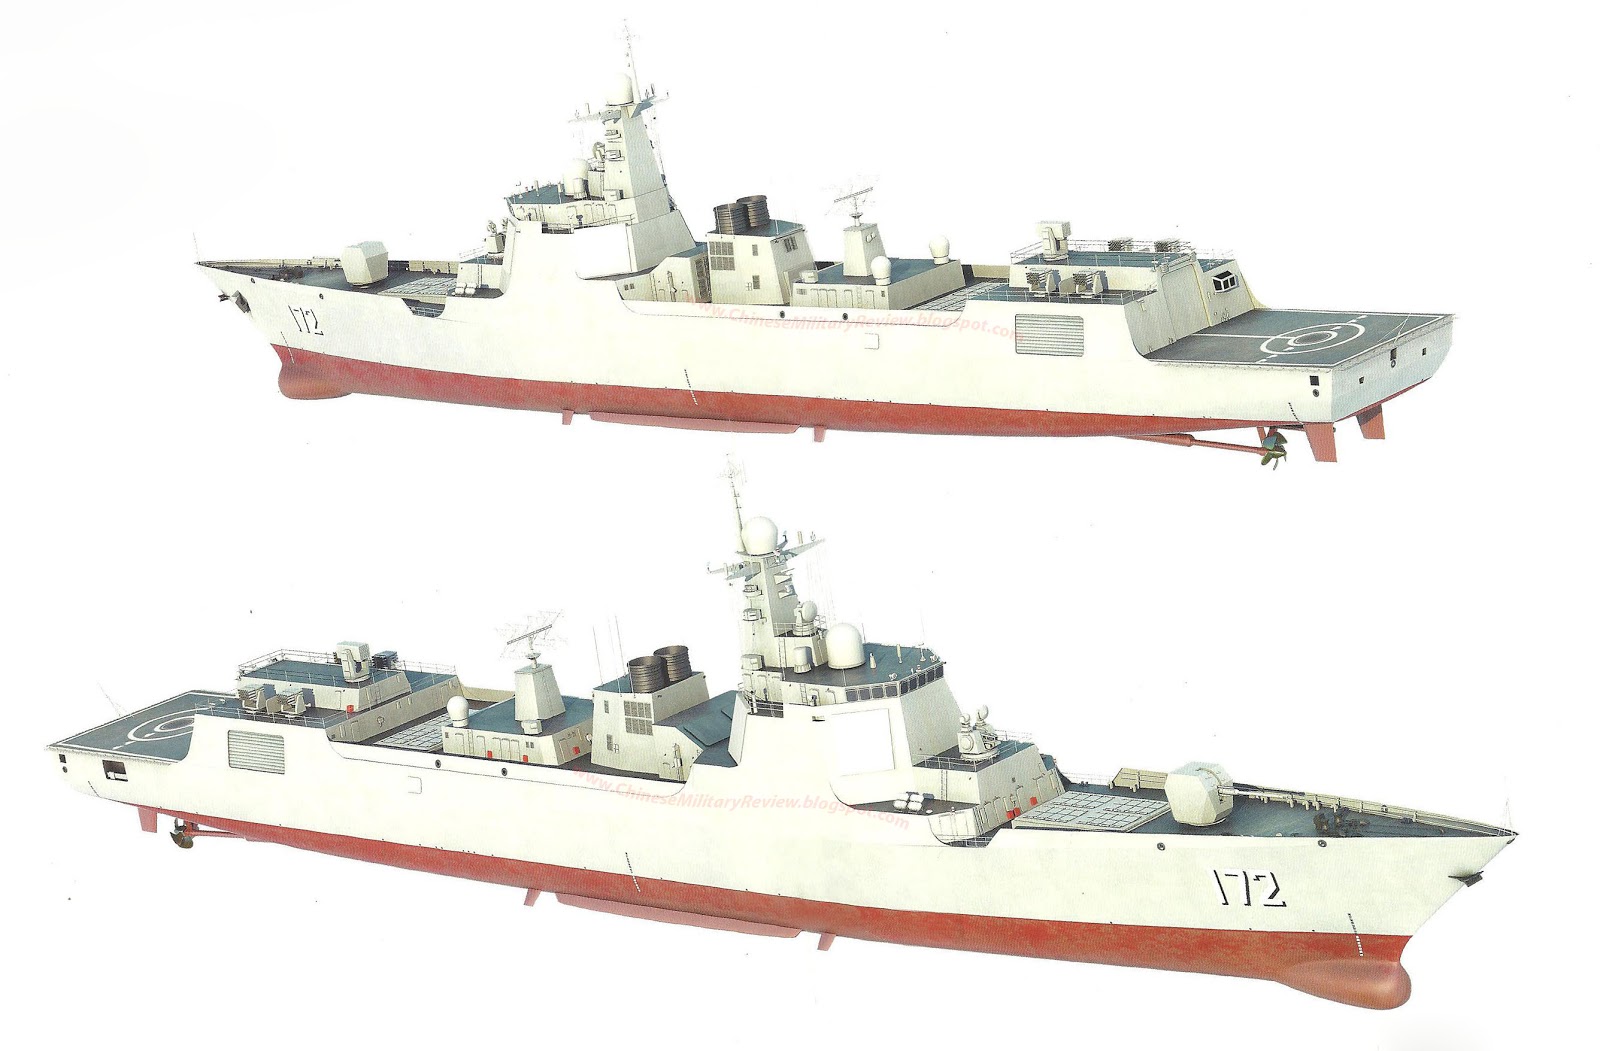 R. P. China - Página 18 Type+052d+HHQ-9+destroyer+class+Lanzhou+People%27s+Liberation+Army+Navy+china+Active+Electronically+Scanned+Array(AESA)+Type+730+CIWS+C-805+602+anti-ship+land+attack+cruise+missiles+4th+173+1723456789+64+96+fired+(3)